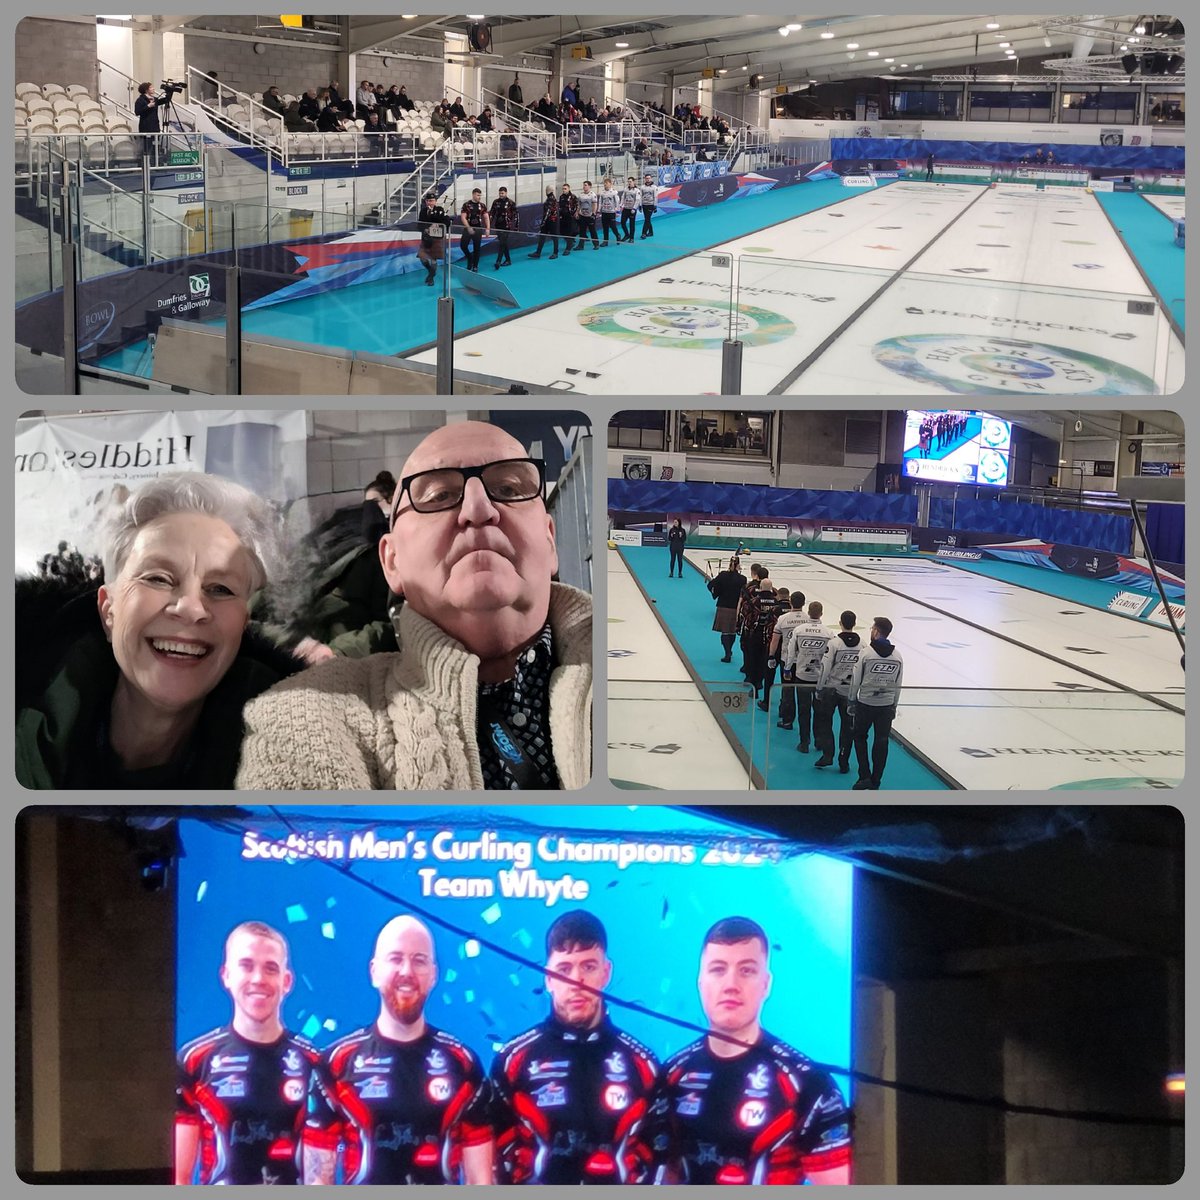 Cracking night with #CllrDavieStitt at @scottishcurling Men's Championship Finals at the fantastic @dumfriesicebowl. Co ngrats to Team Whyte who claimed the title by 1 point over a gallant Team JCraik at the extra end. Thanks to all staff
@dgcouncil 
#LoveCurling 
#LoveDandG ❤️